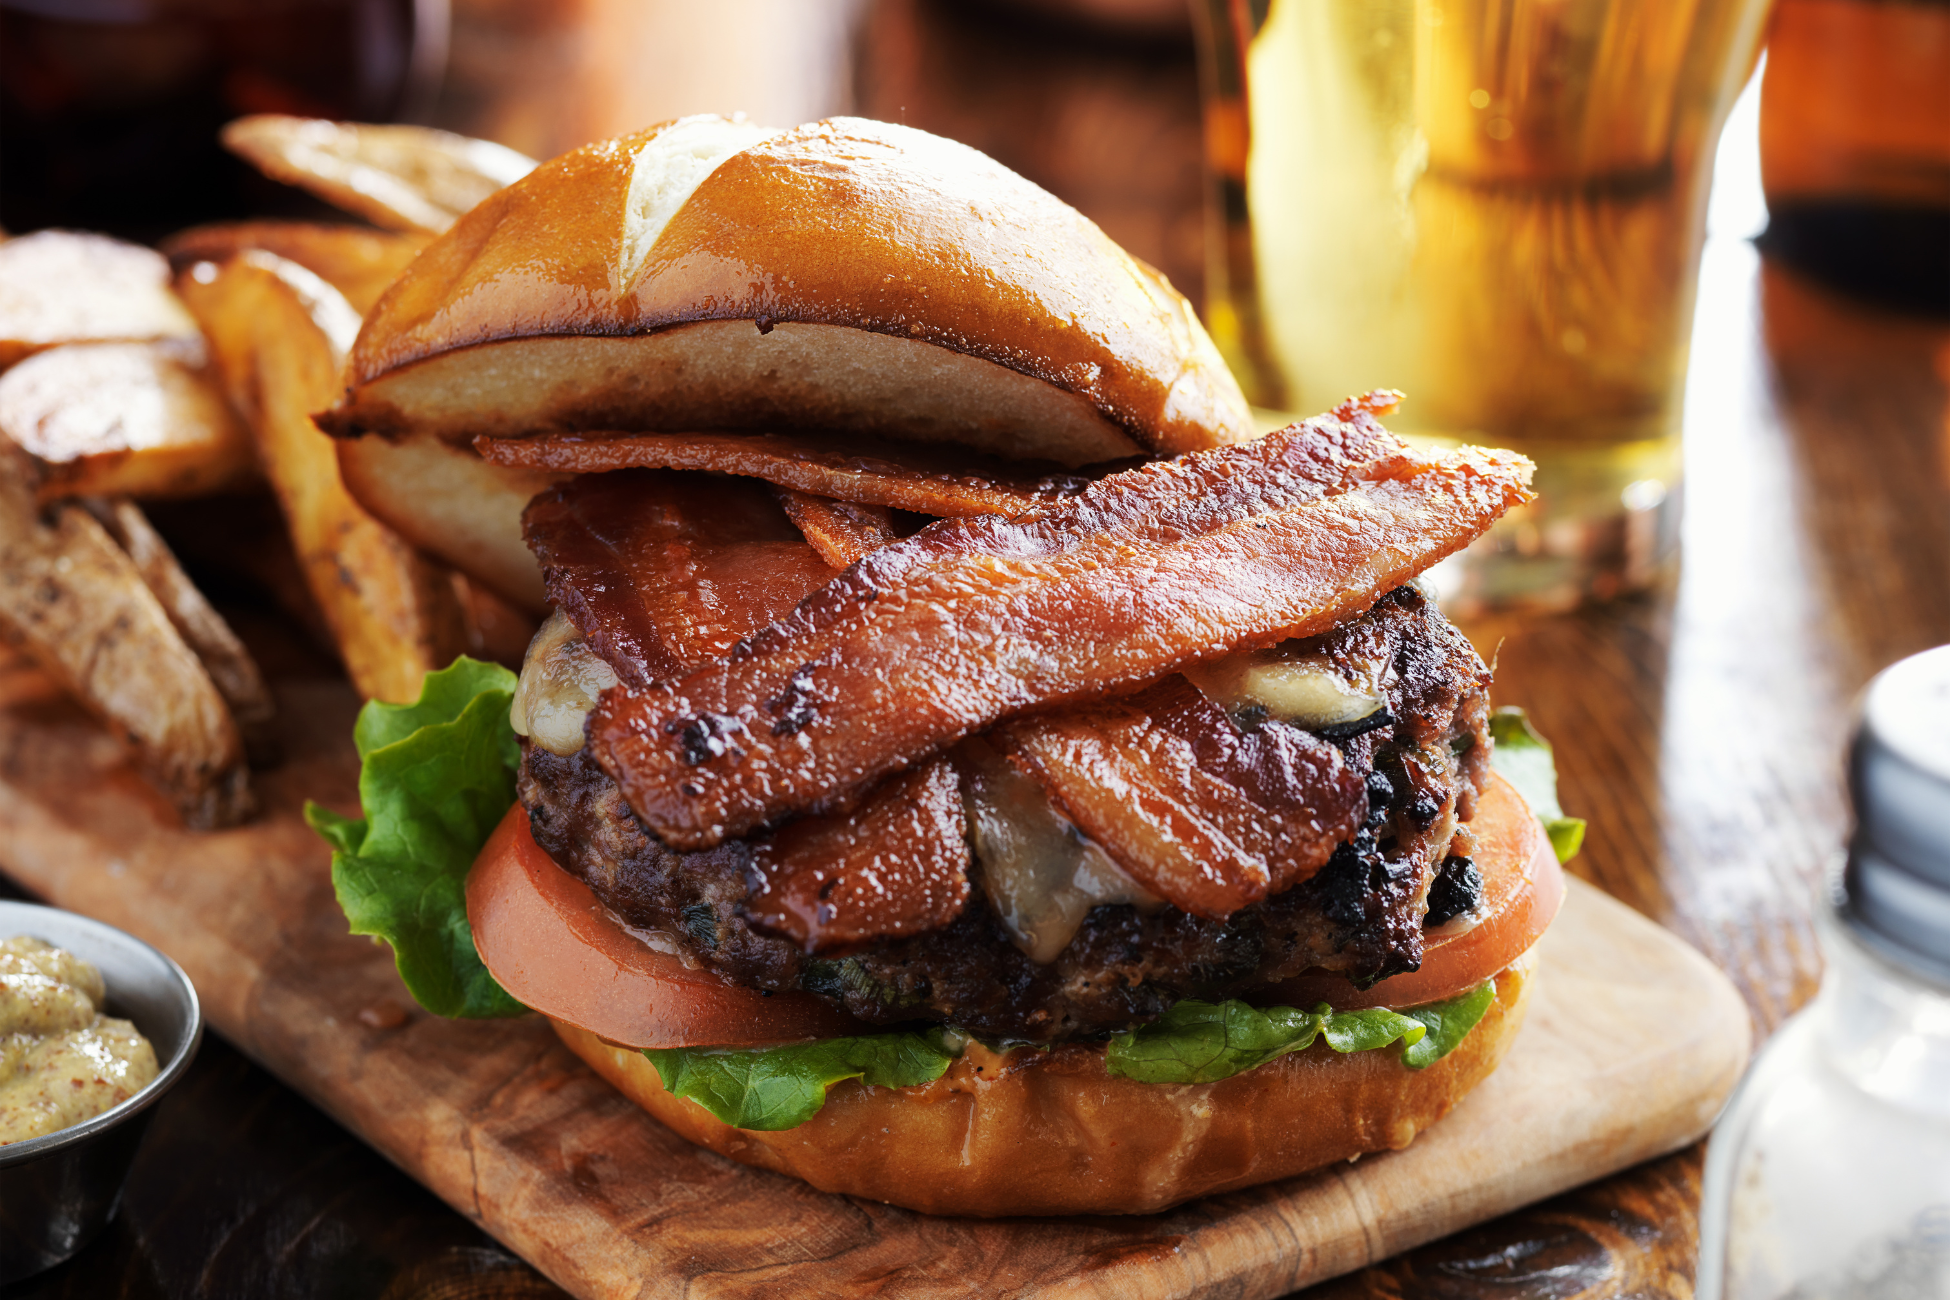 Whiskey-Glazed Bison Burger with Maple Bacon Recipe